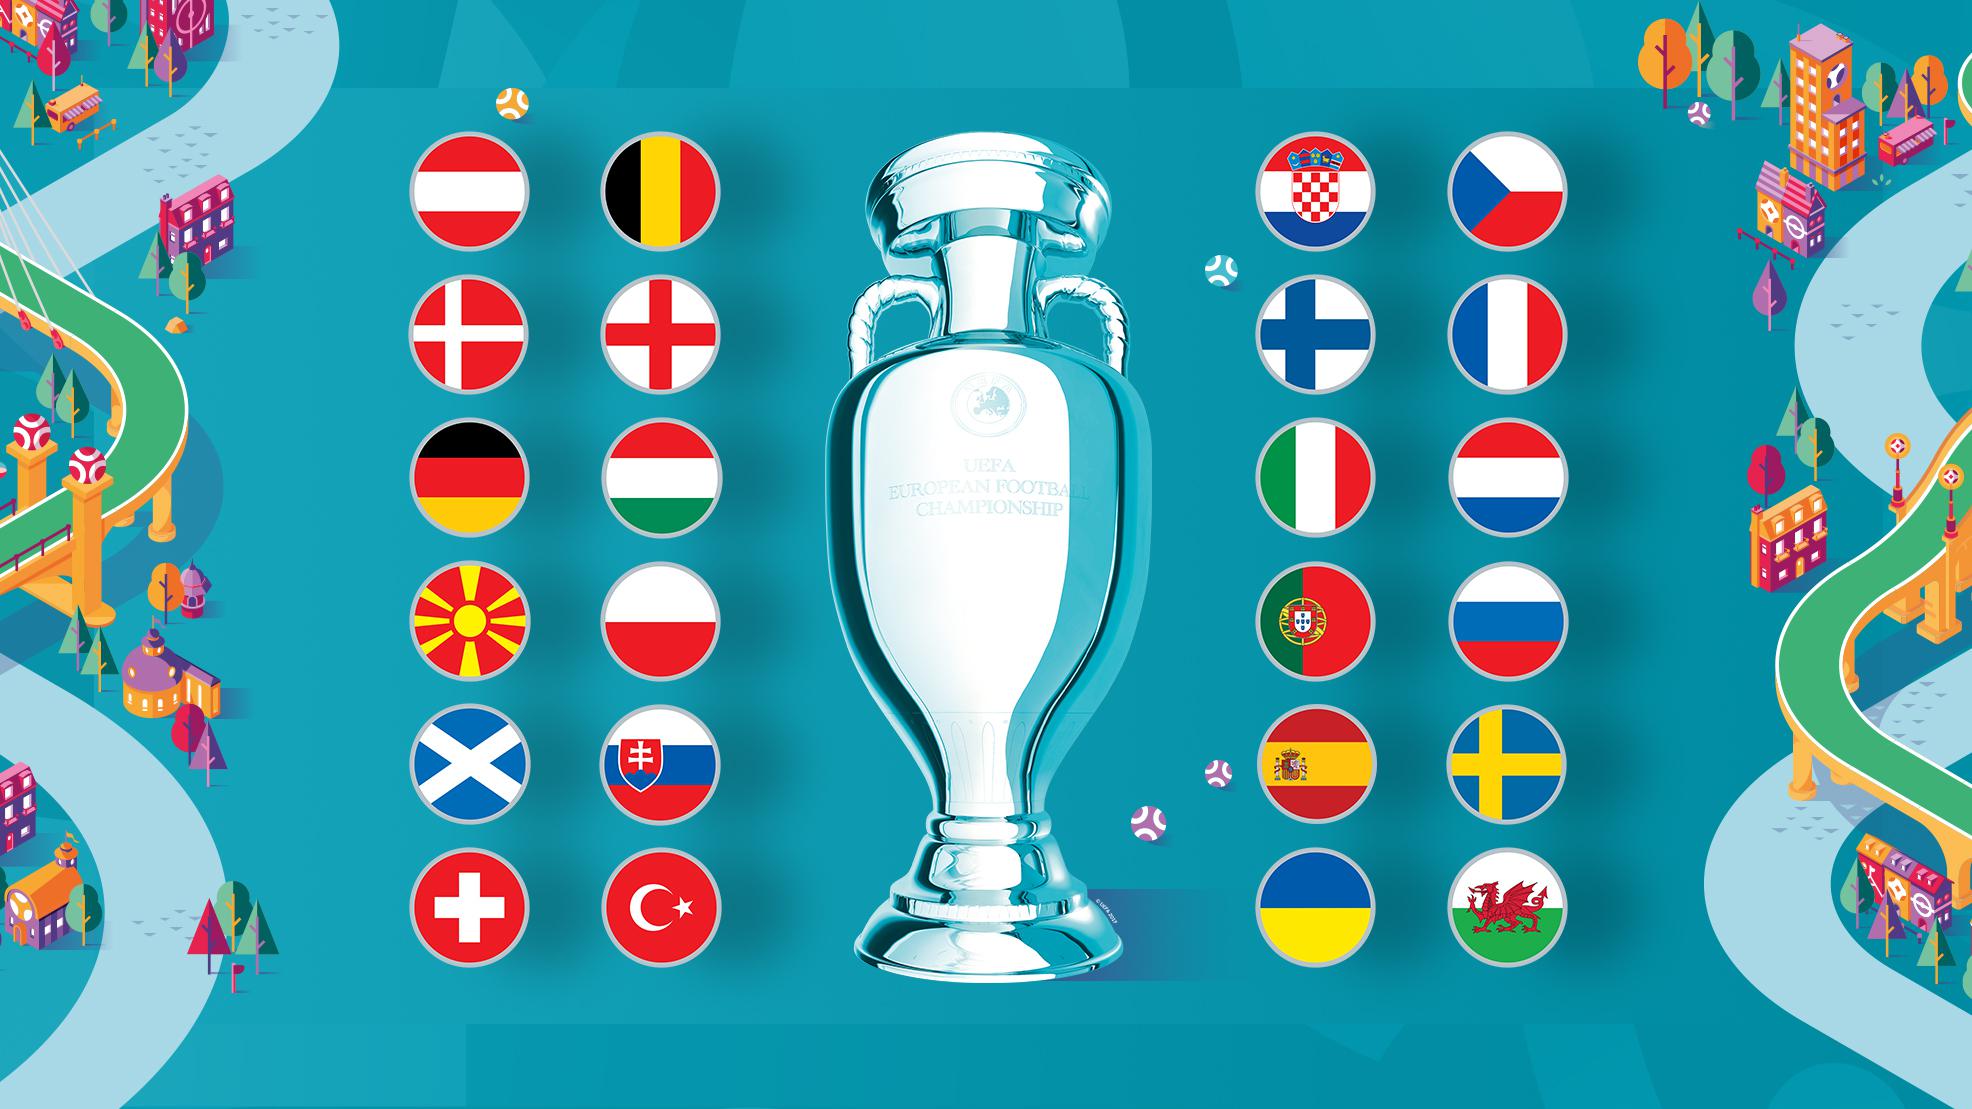 EURO 2020 kicks off from tomorrow, but economic impact will be limited